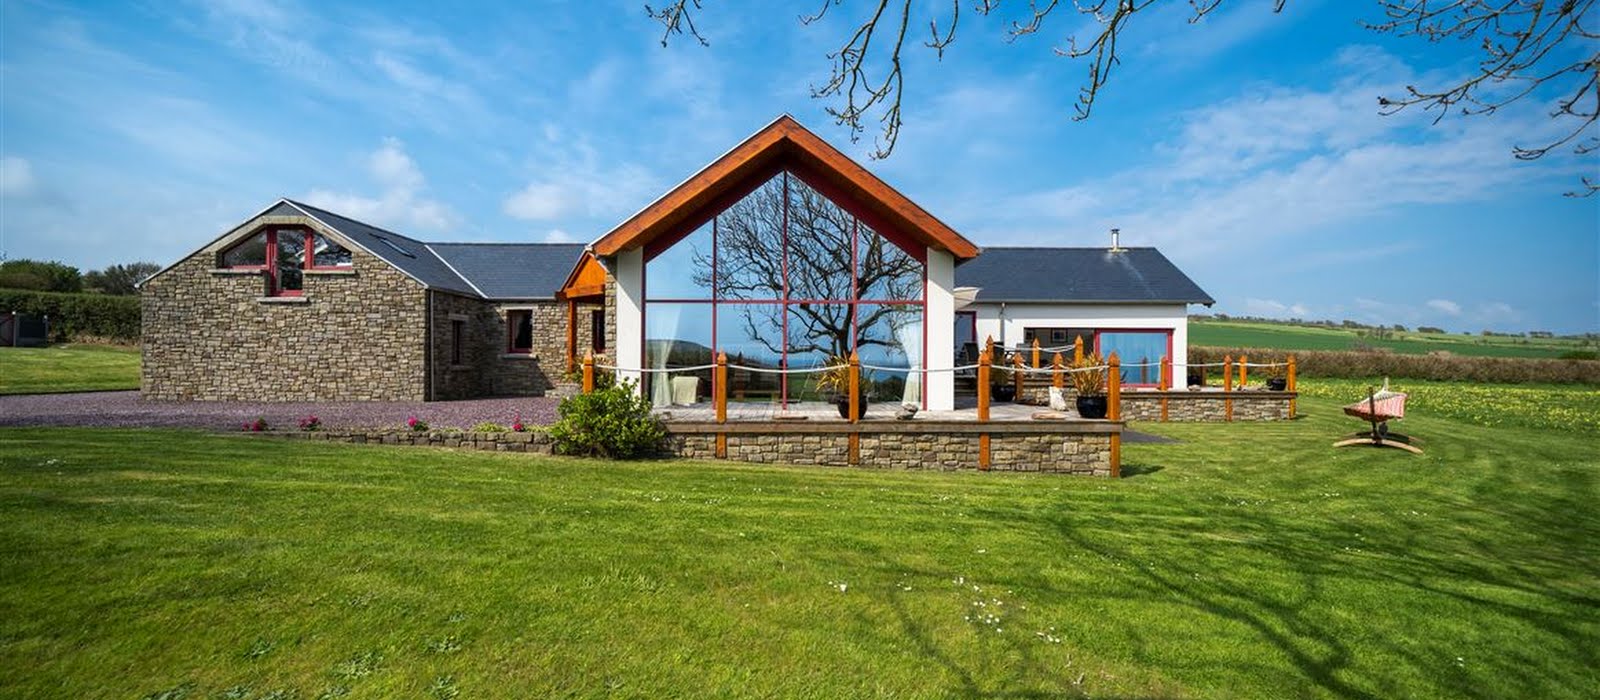 This spectacular coastal home in West Cork is on the market for €1.25 million